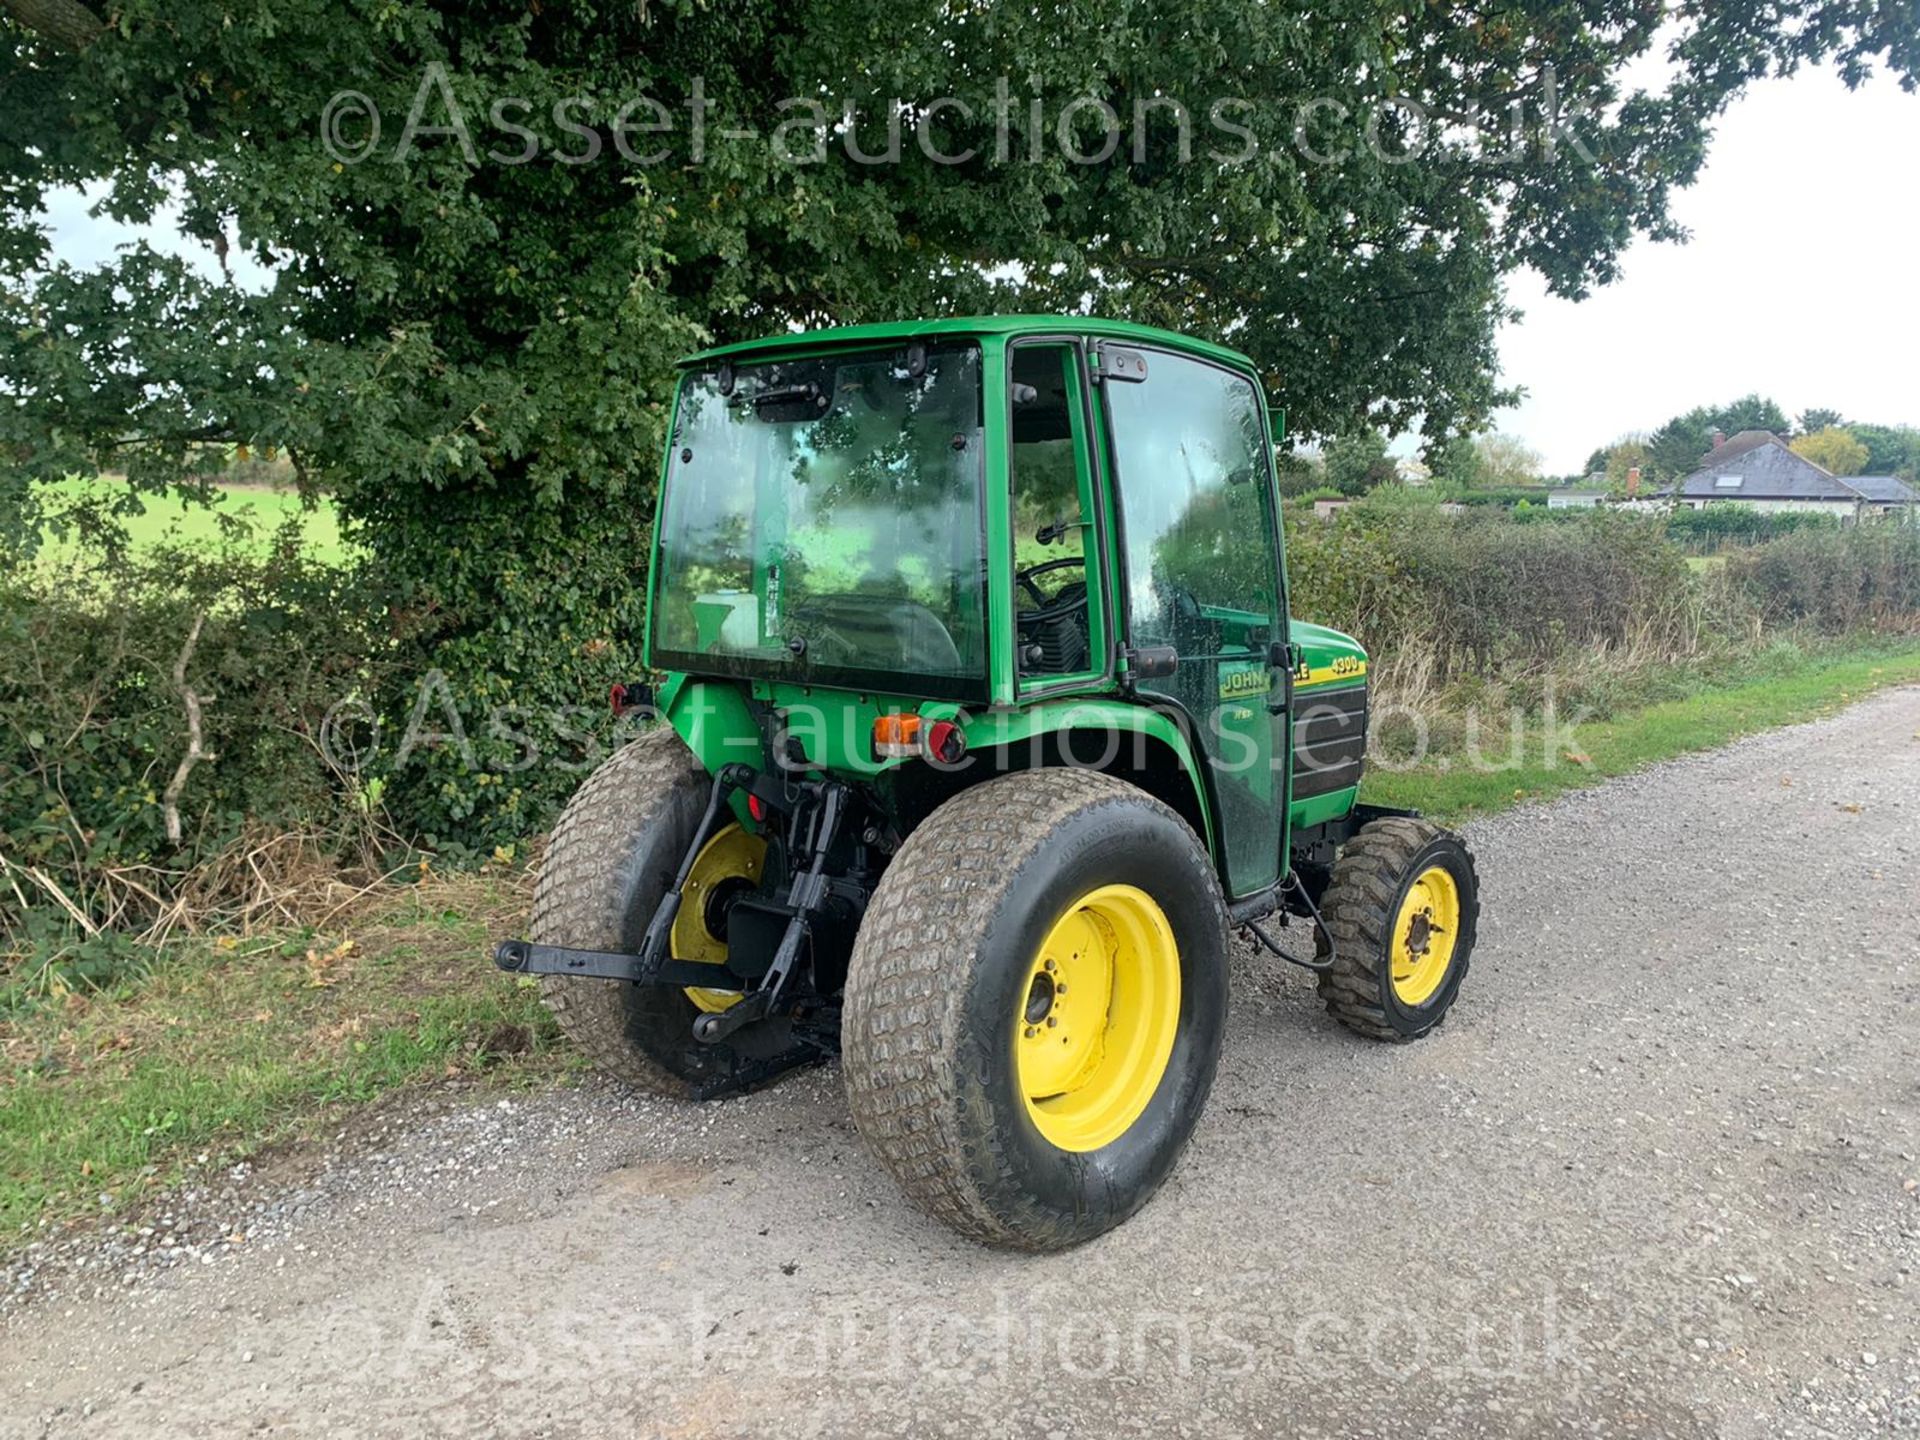 JOHN DEERE 4300 32hp 4WD COMPACT TRACTOR, RUNS DRIVES AND WORKS, CABBED, REAR TOW, ROAD KIT - Image 5 of 9